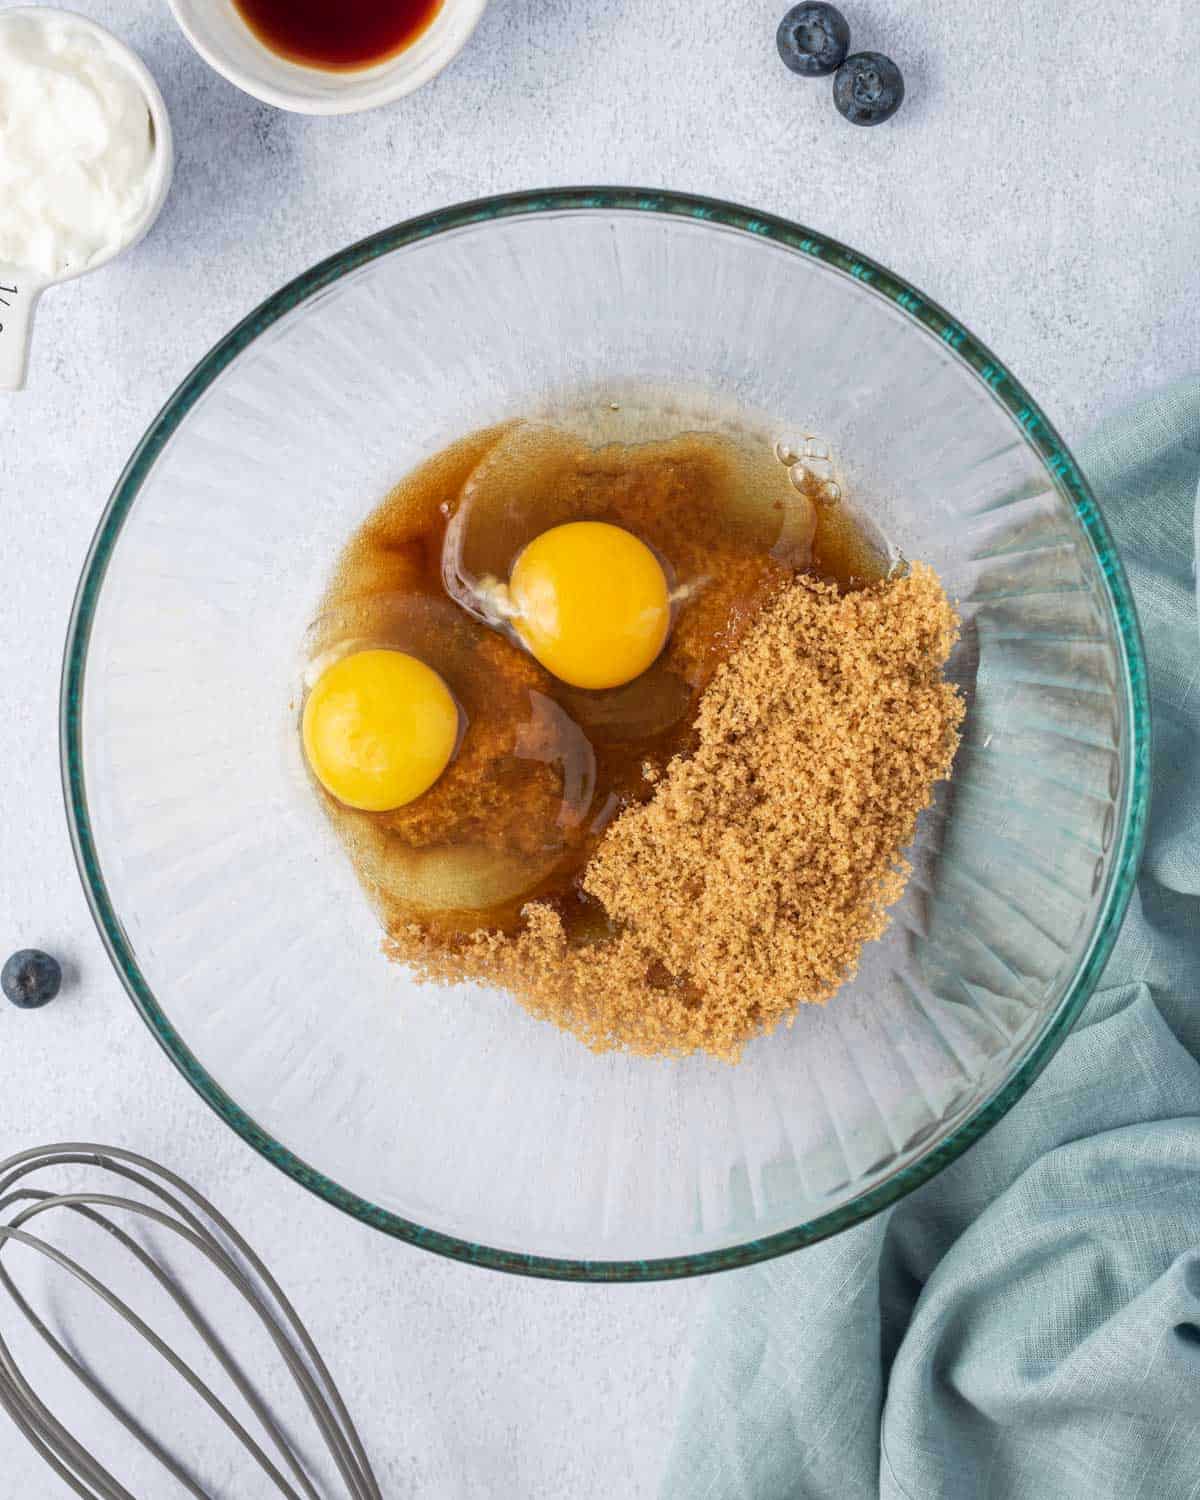 brown sugar, eggs, and coconut oil, placed in a bowl